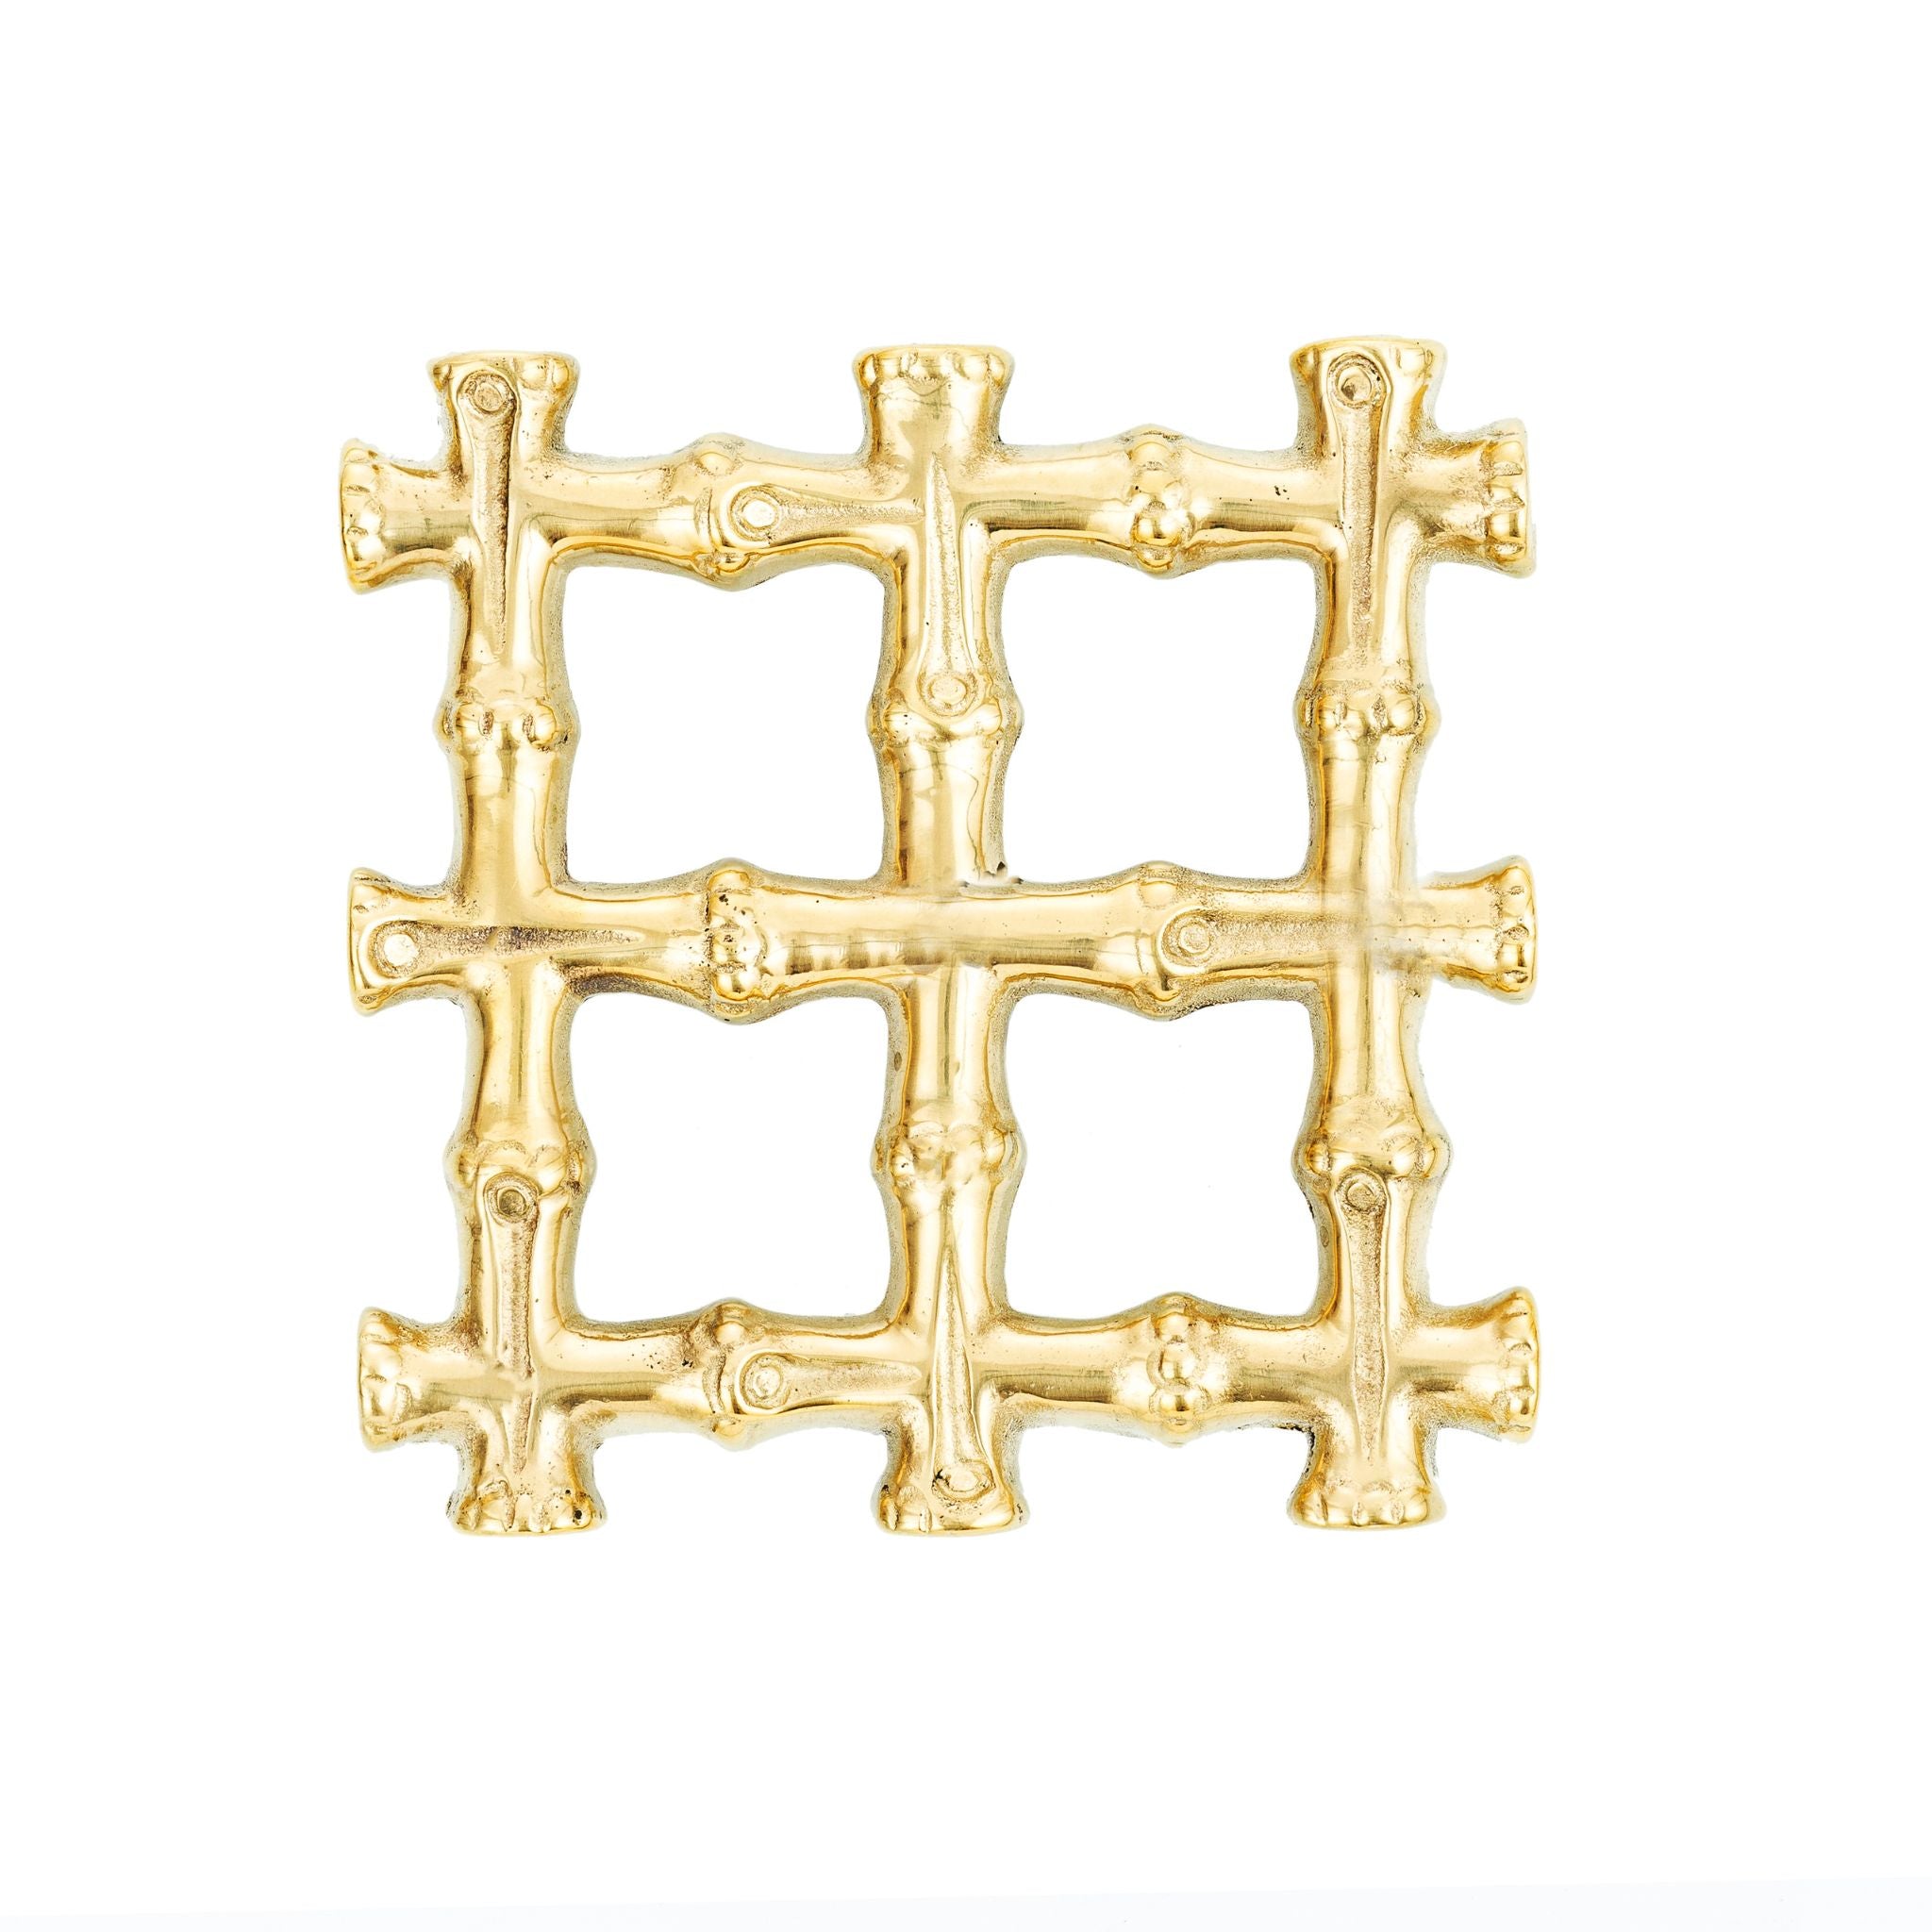 A polished brass cabinet knob featuring a timeless bamboo motif, inspired by the lush forests of Bandung.